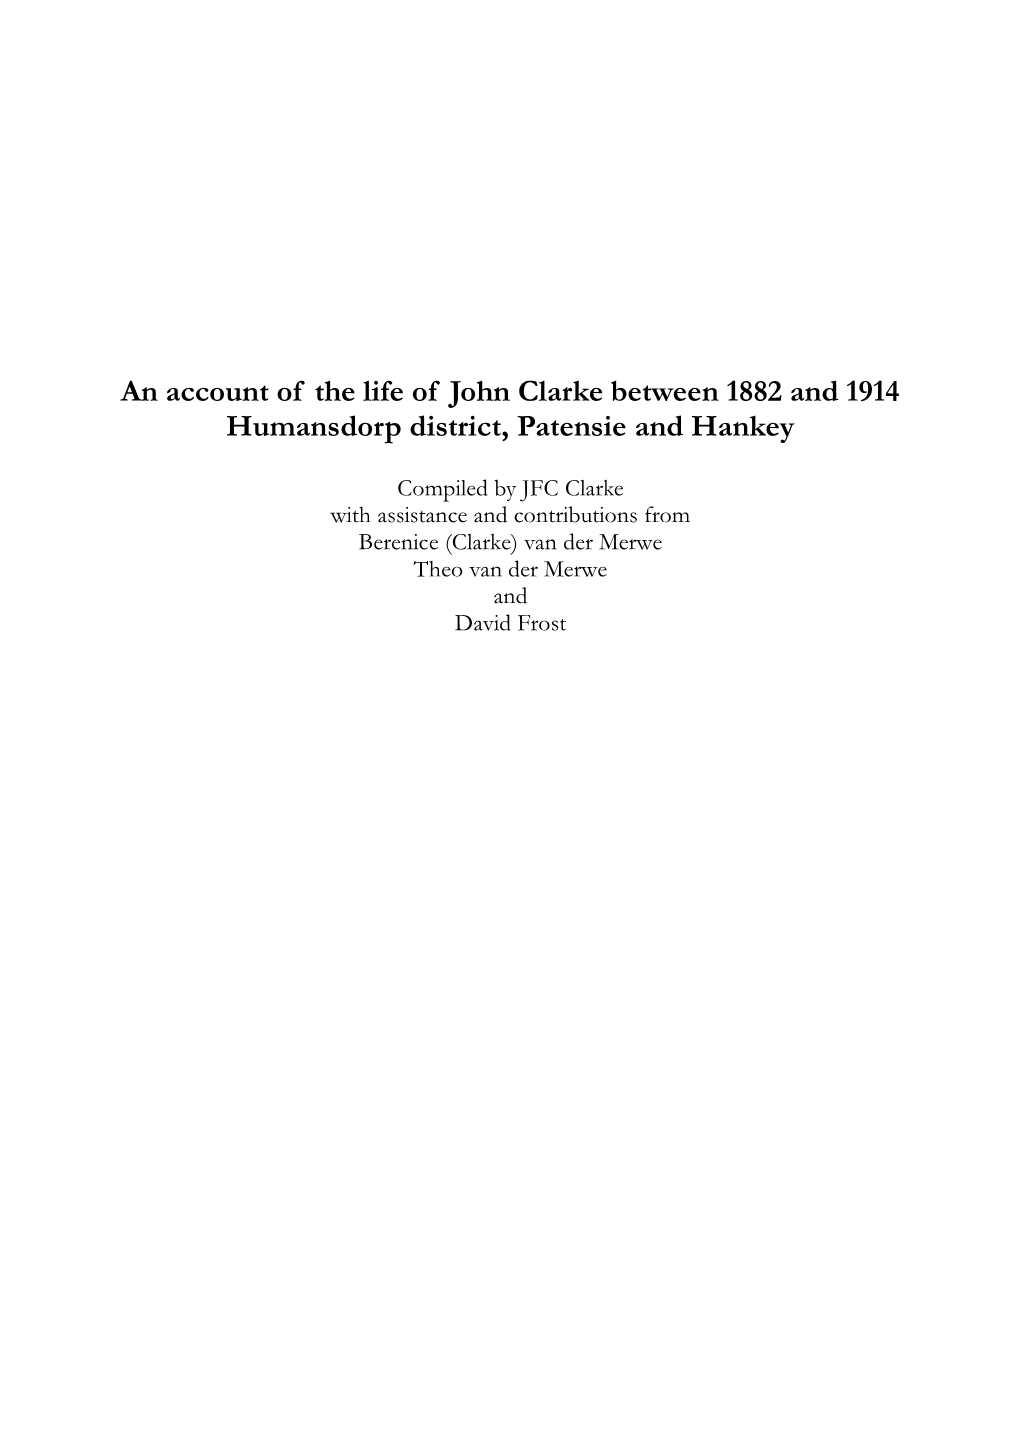 An Account of the Life of John Clarke Between 1882 and 1914 Humansdorp District, Patensie and Hankey